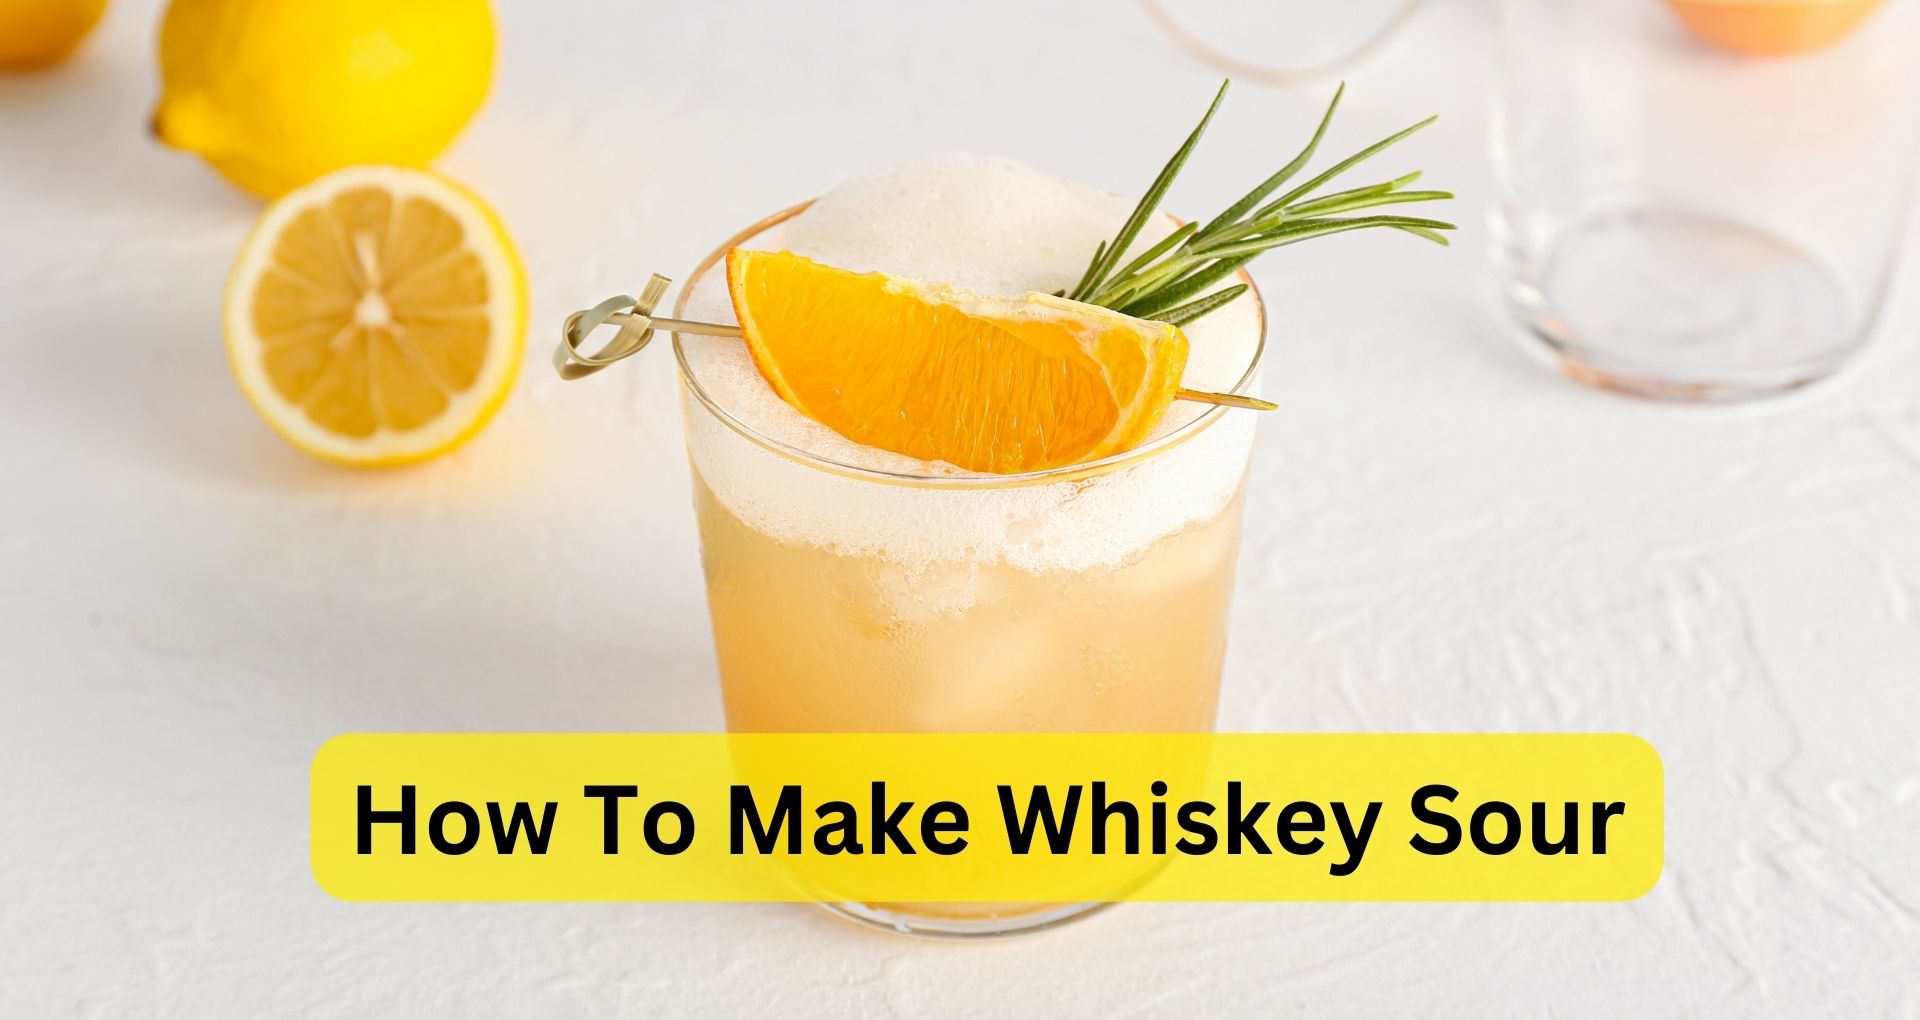 How To Make Whiskey Sour?